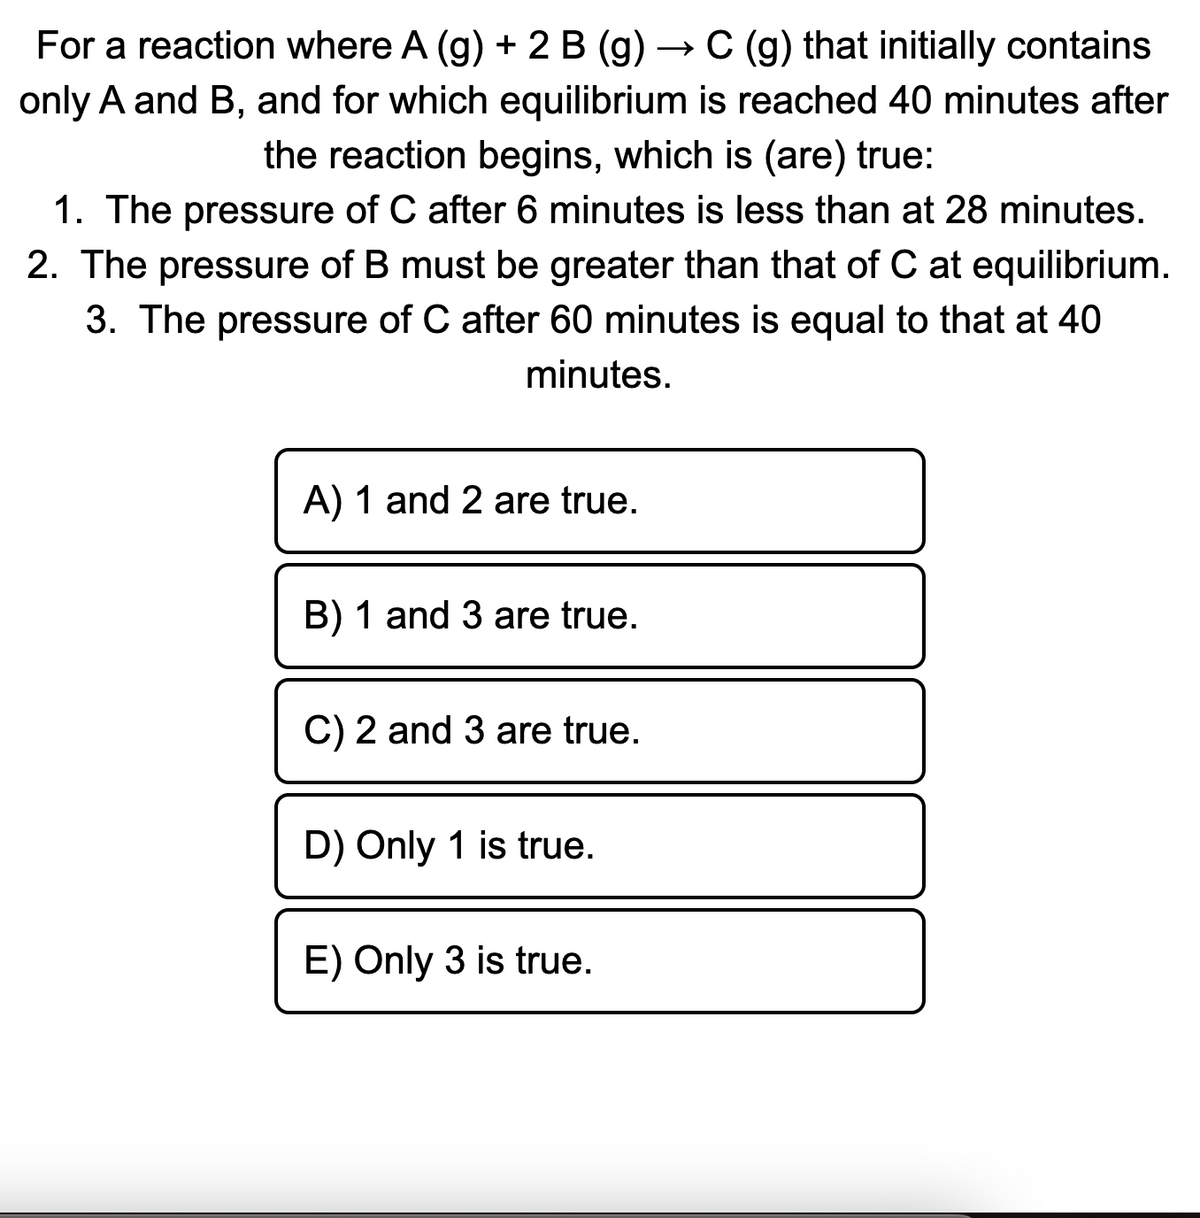 For a reaction where A (g) + 2 B (g) → C (g) that initially contains
only A and B, and for which equilibrium is reached 40 minutes after
the reaction begins, which is (are) true:
1. The pressure of C after 6 minutes is less than at 28 minutes.
2. The pressure of B must be greater than that of C at equilibrium.
3. The pressure of C after 60 minutes is equal to that at 40
minutes.
A) 1 and 2 are true.
B) 1 and 3 are true.
C) 2 and 3 are true.
D) Only 1 is true.
E) Only 3 is true.
